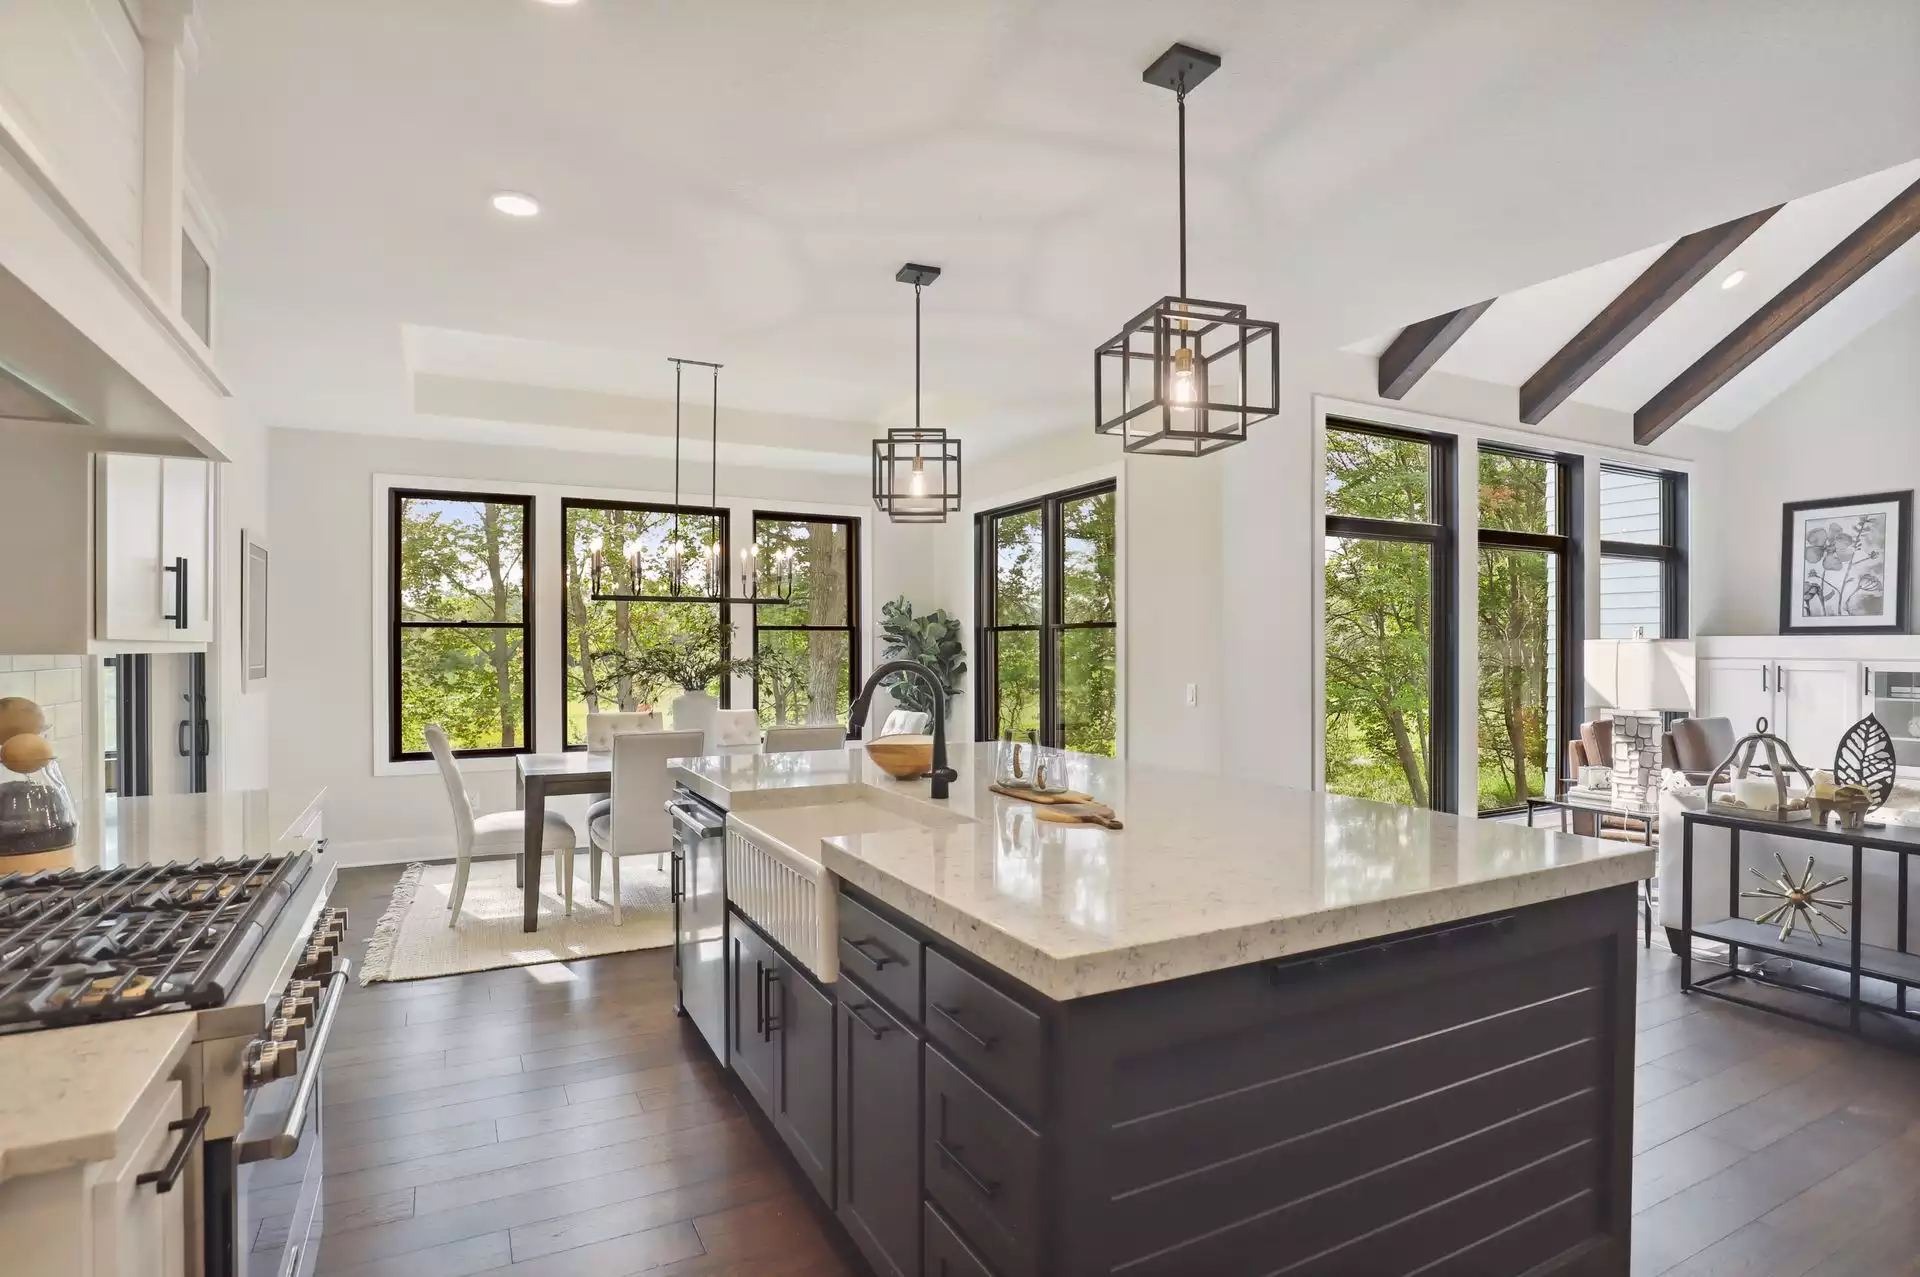 Open kitchen plan takes in views from extra tall windows